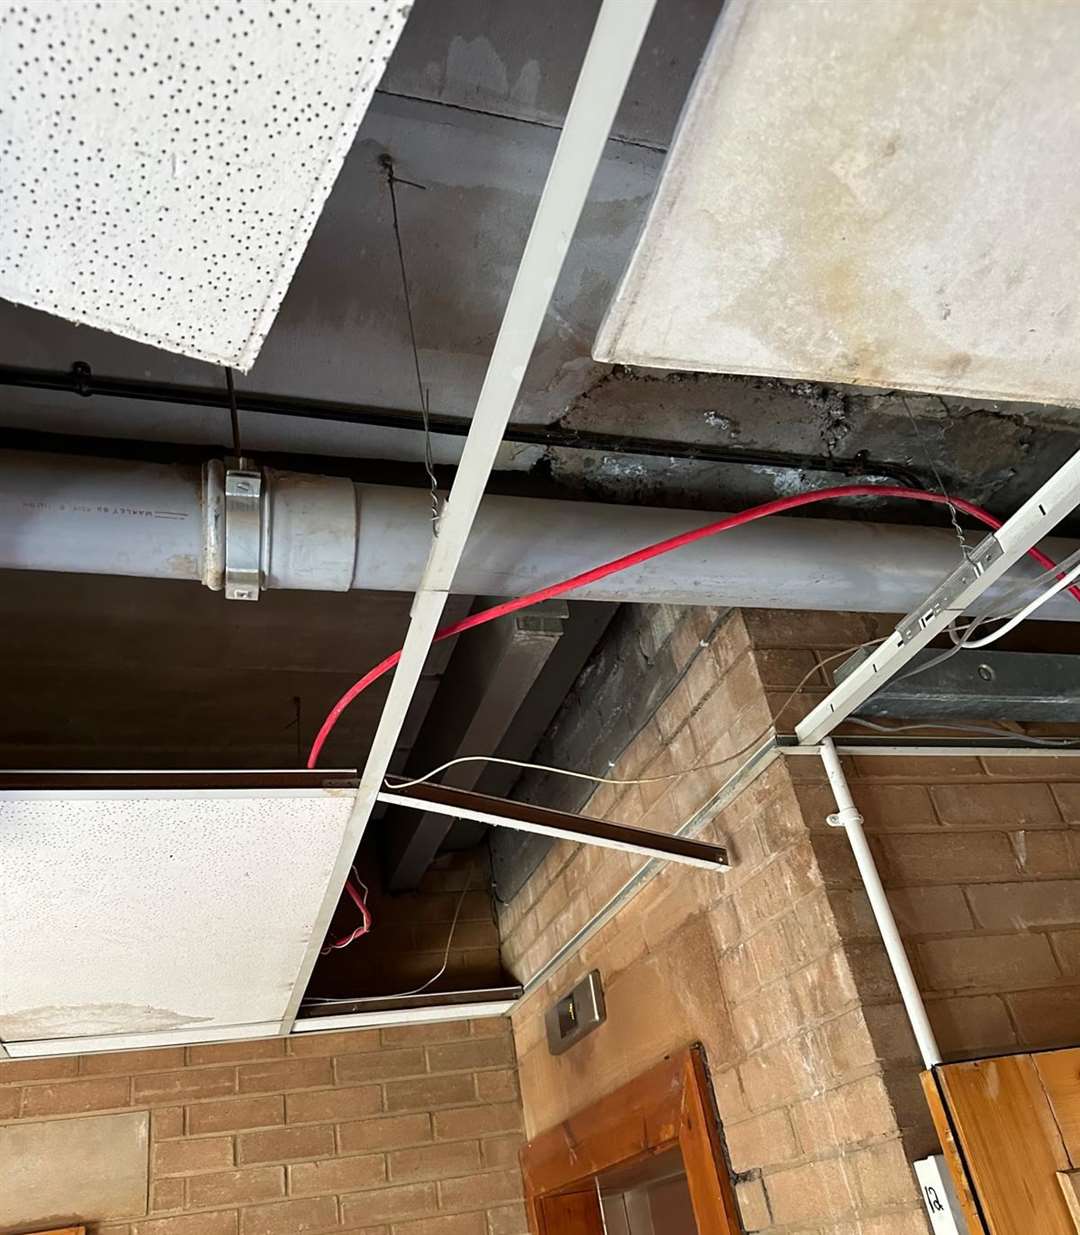 Ceilings are non-existent in some parts with exposed wiring and pipes.